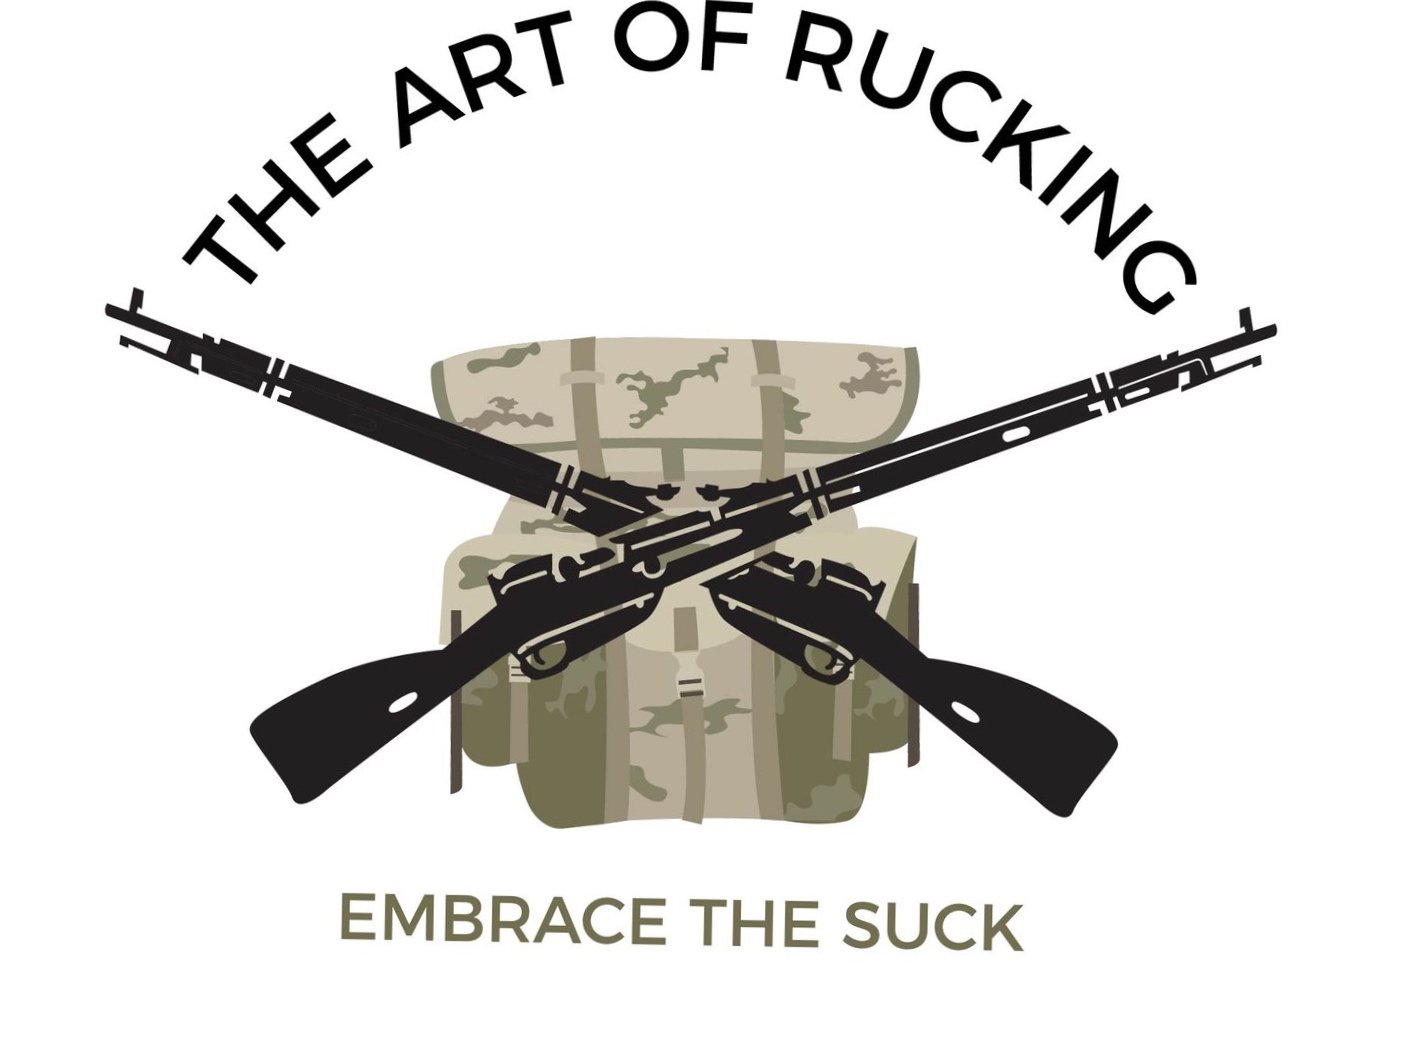 The Art of Rucking